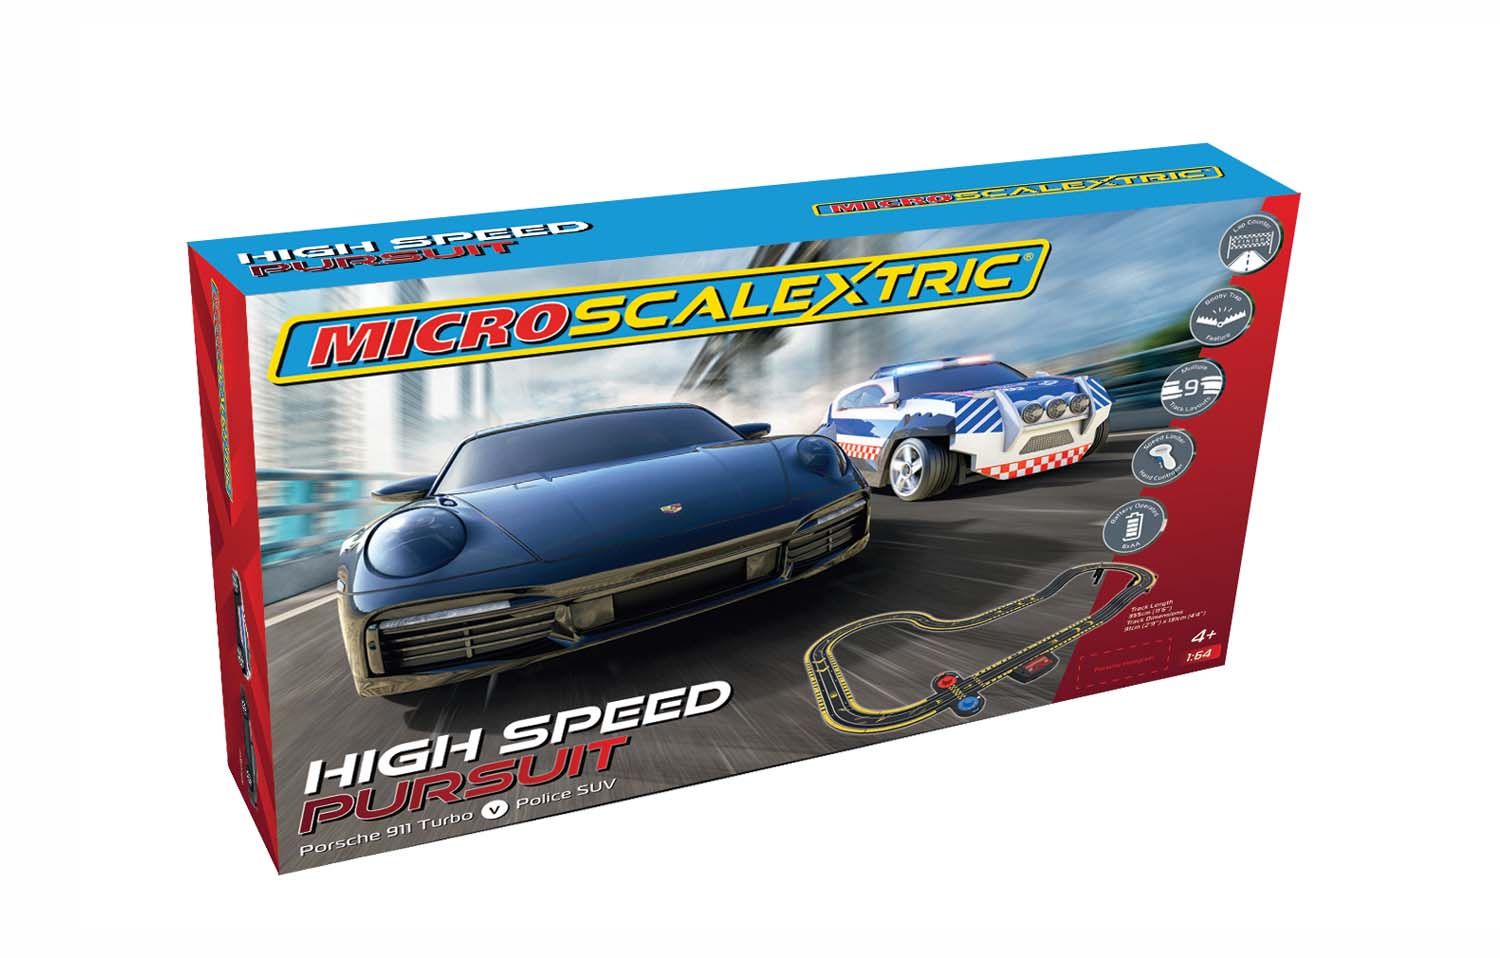 Scalextric G1177M Micro, Green